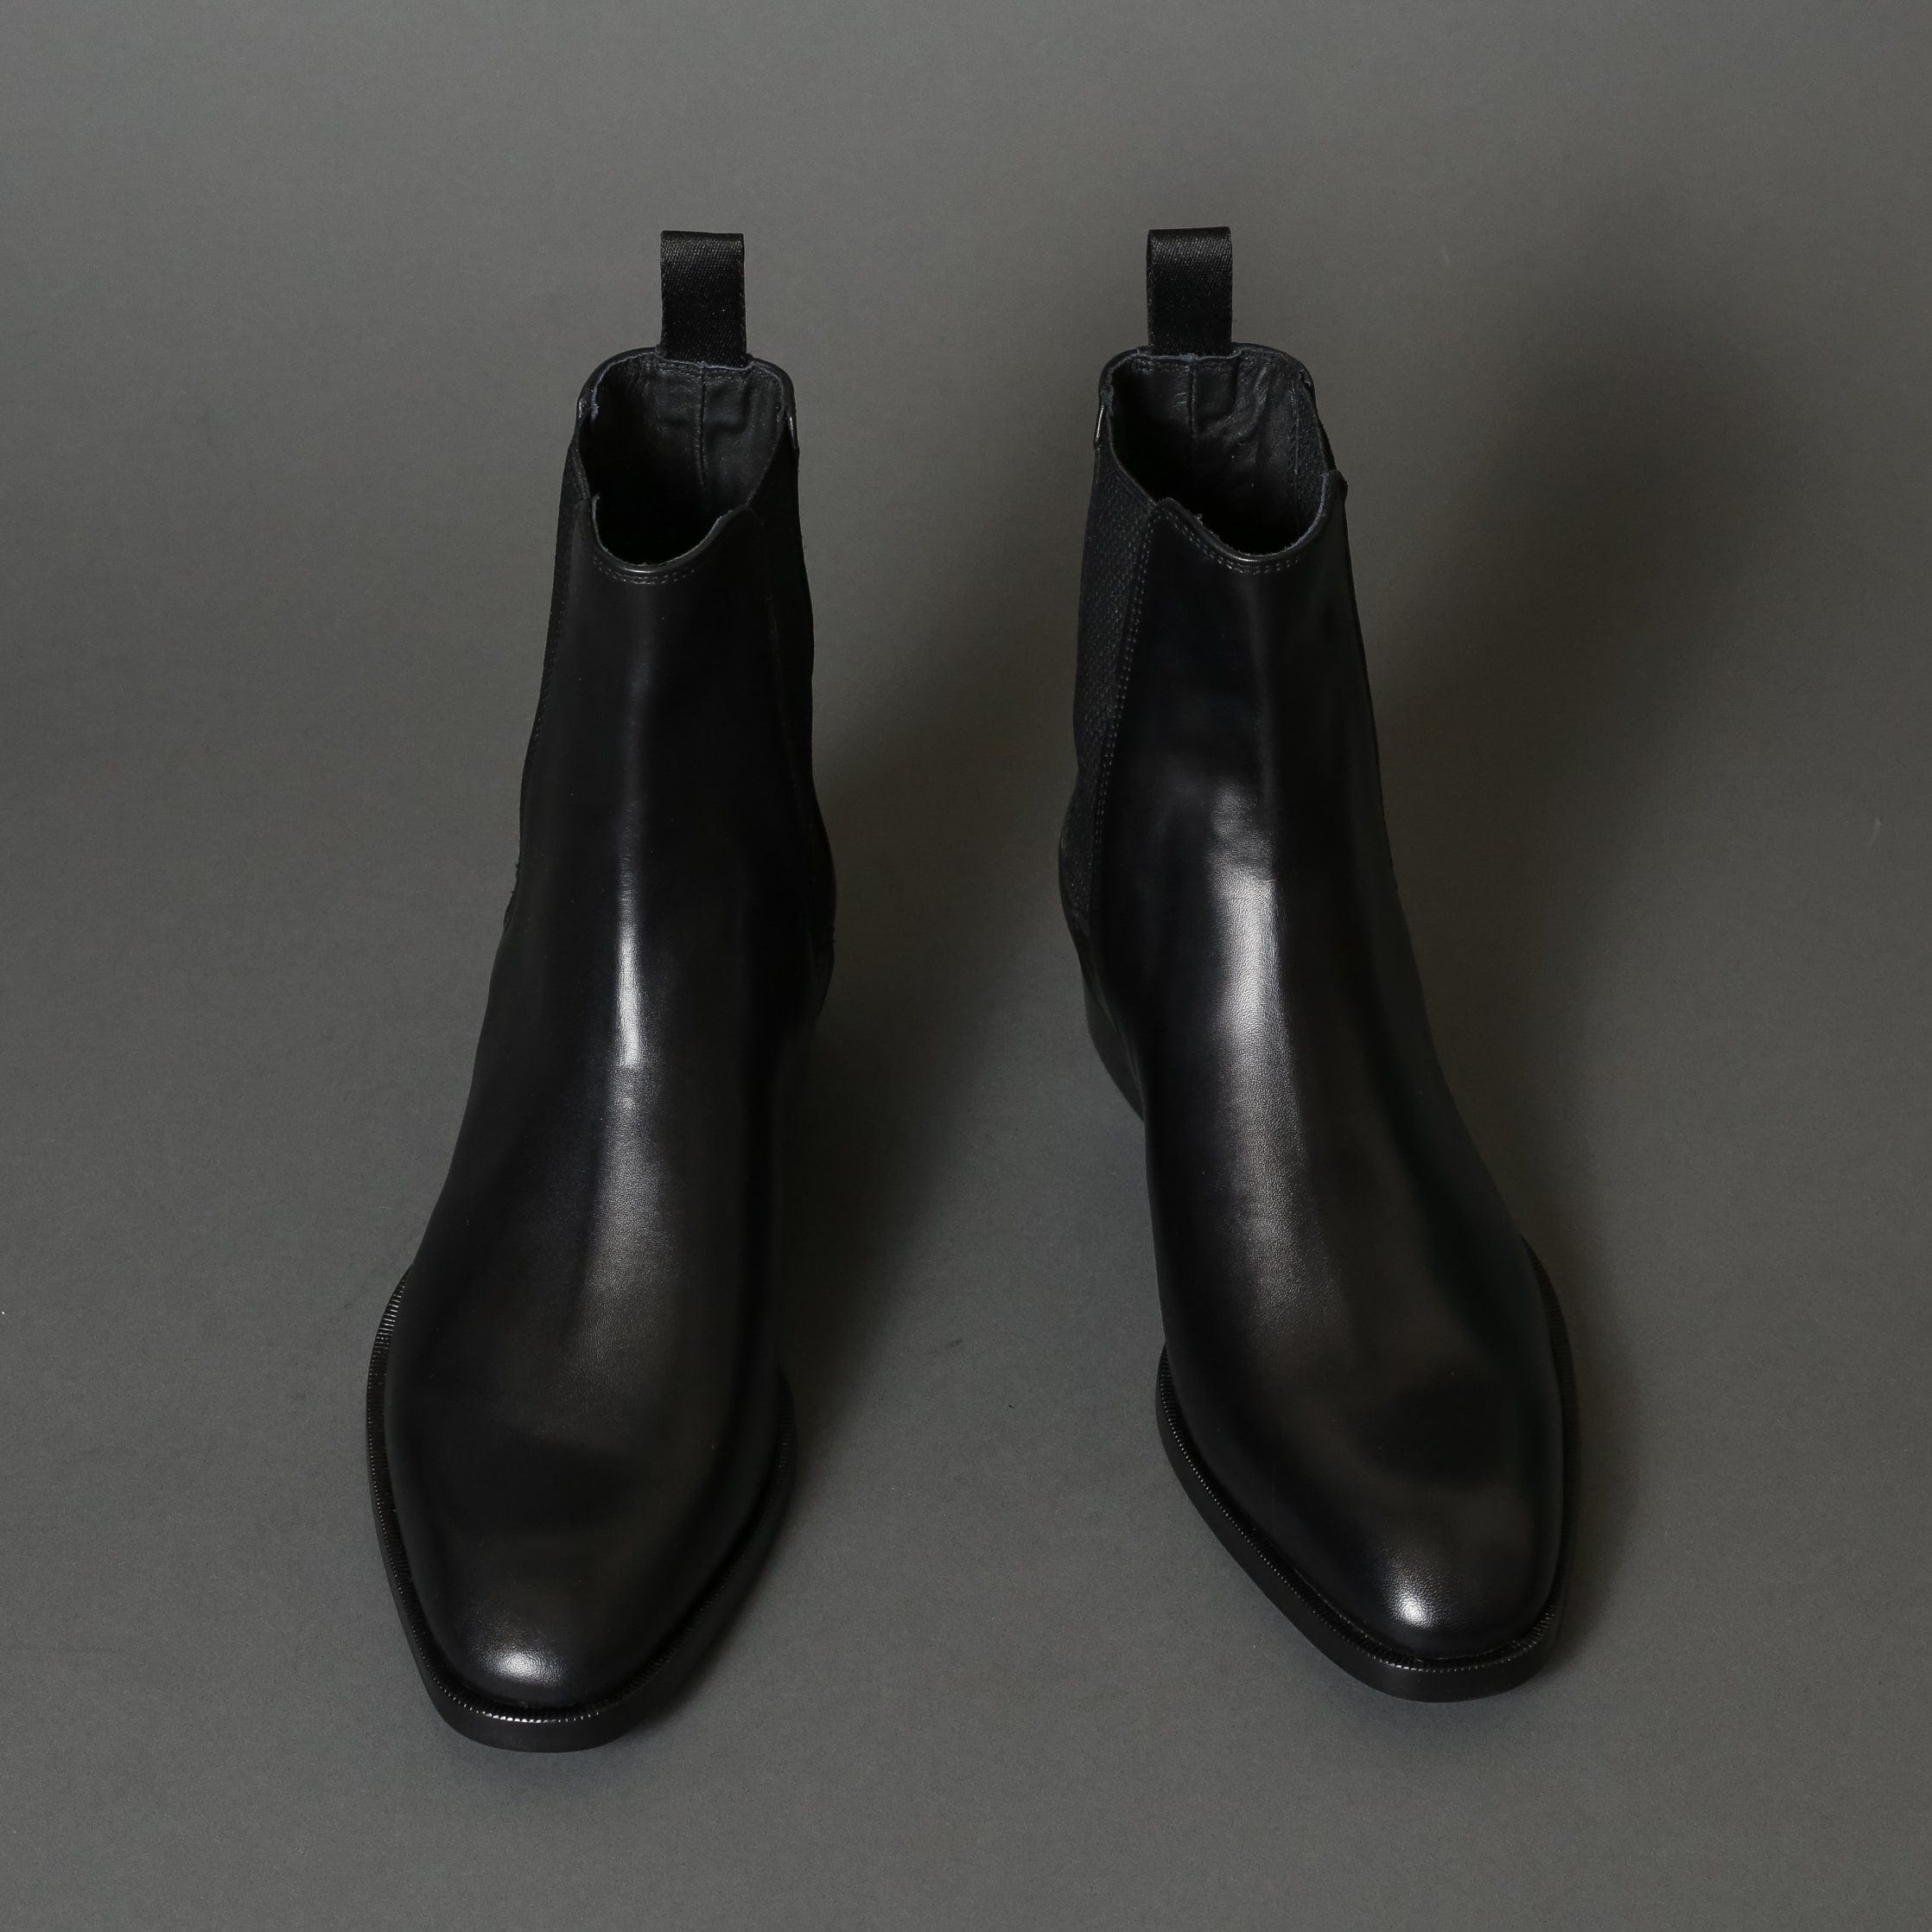 Conflict For Interest Chelsea Boot Conflict For Interest Beatles Black